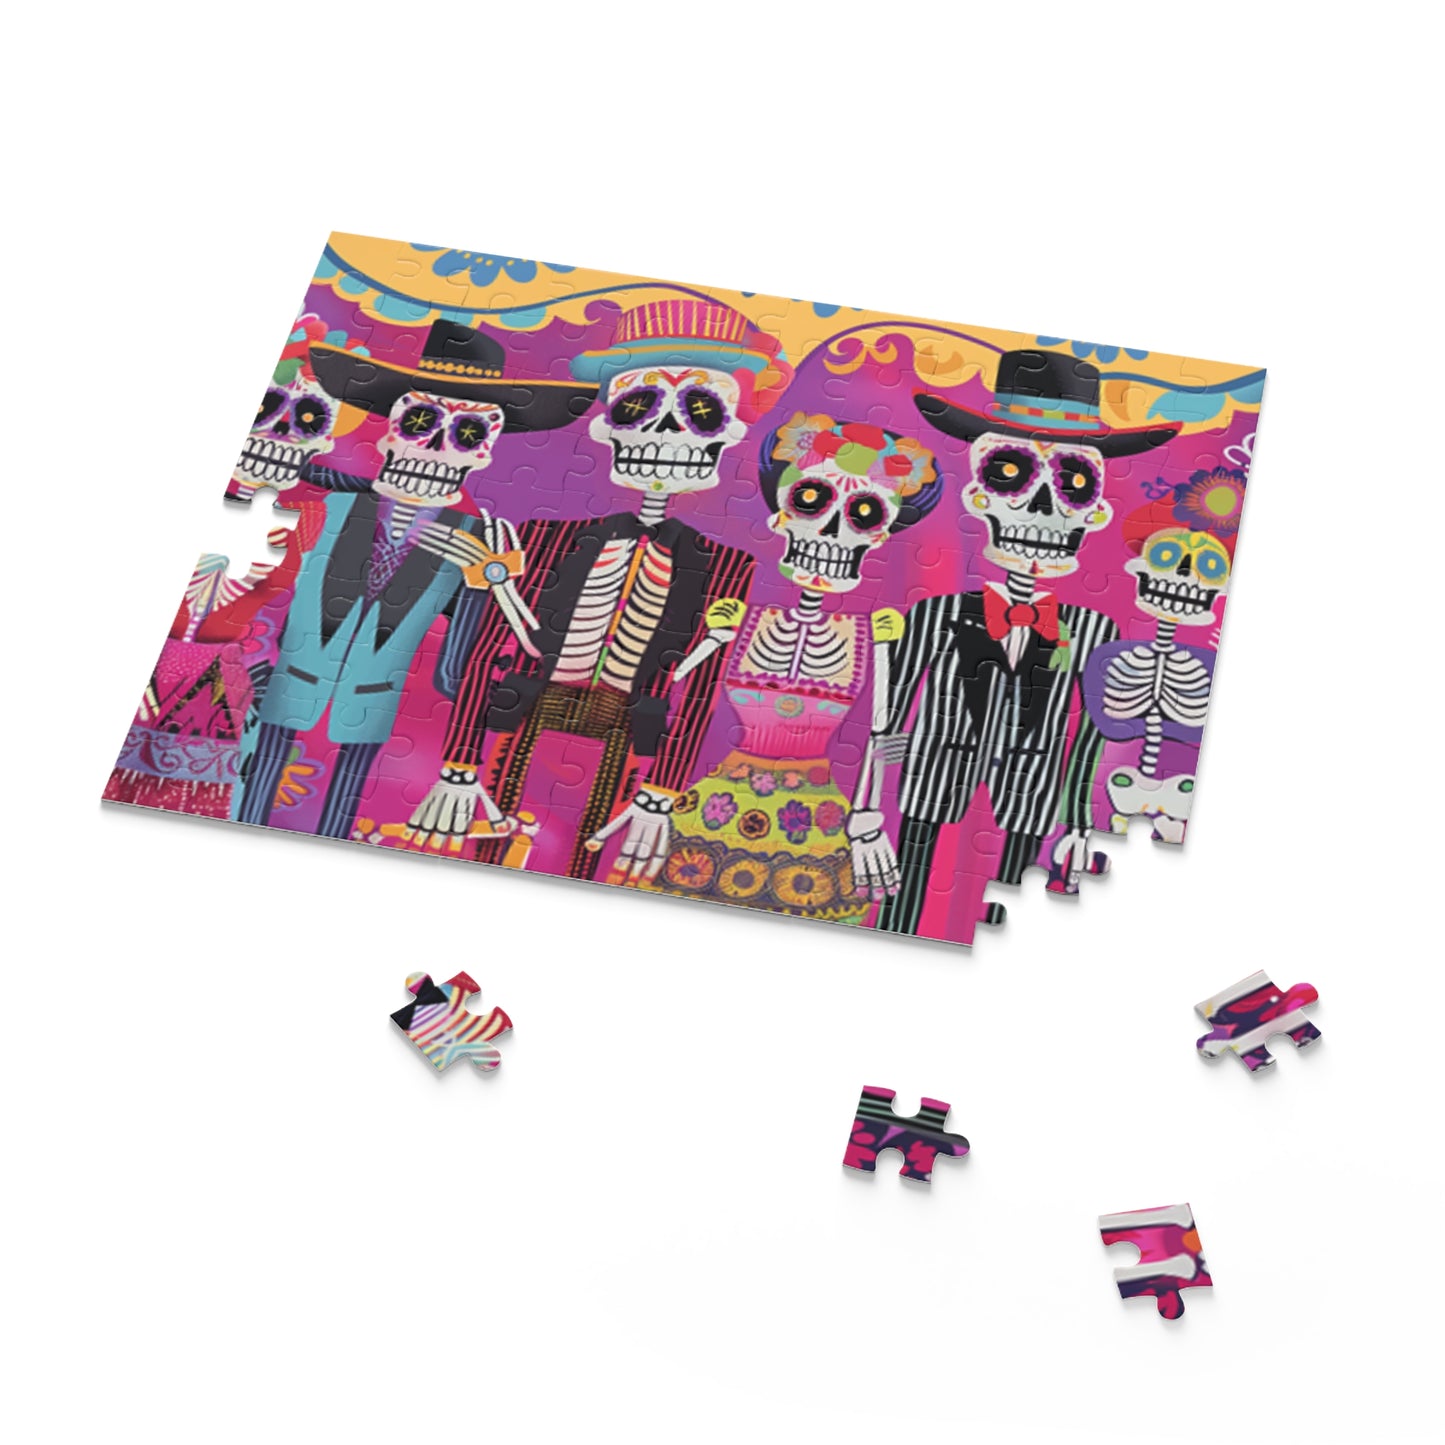 Mexican Art Day of the Dead Día de Muertos Jigsaw Puzzle Adult Birthday Business Jigsaw Puzzle Gift for Him Funny Humorous Indoor Outdoor Game Gift For Her Online-7